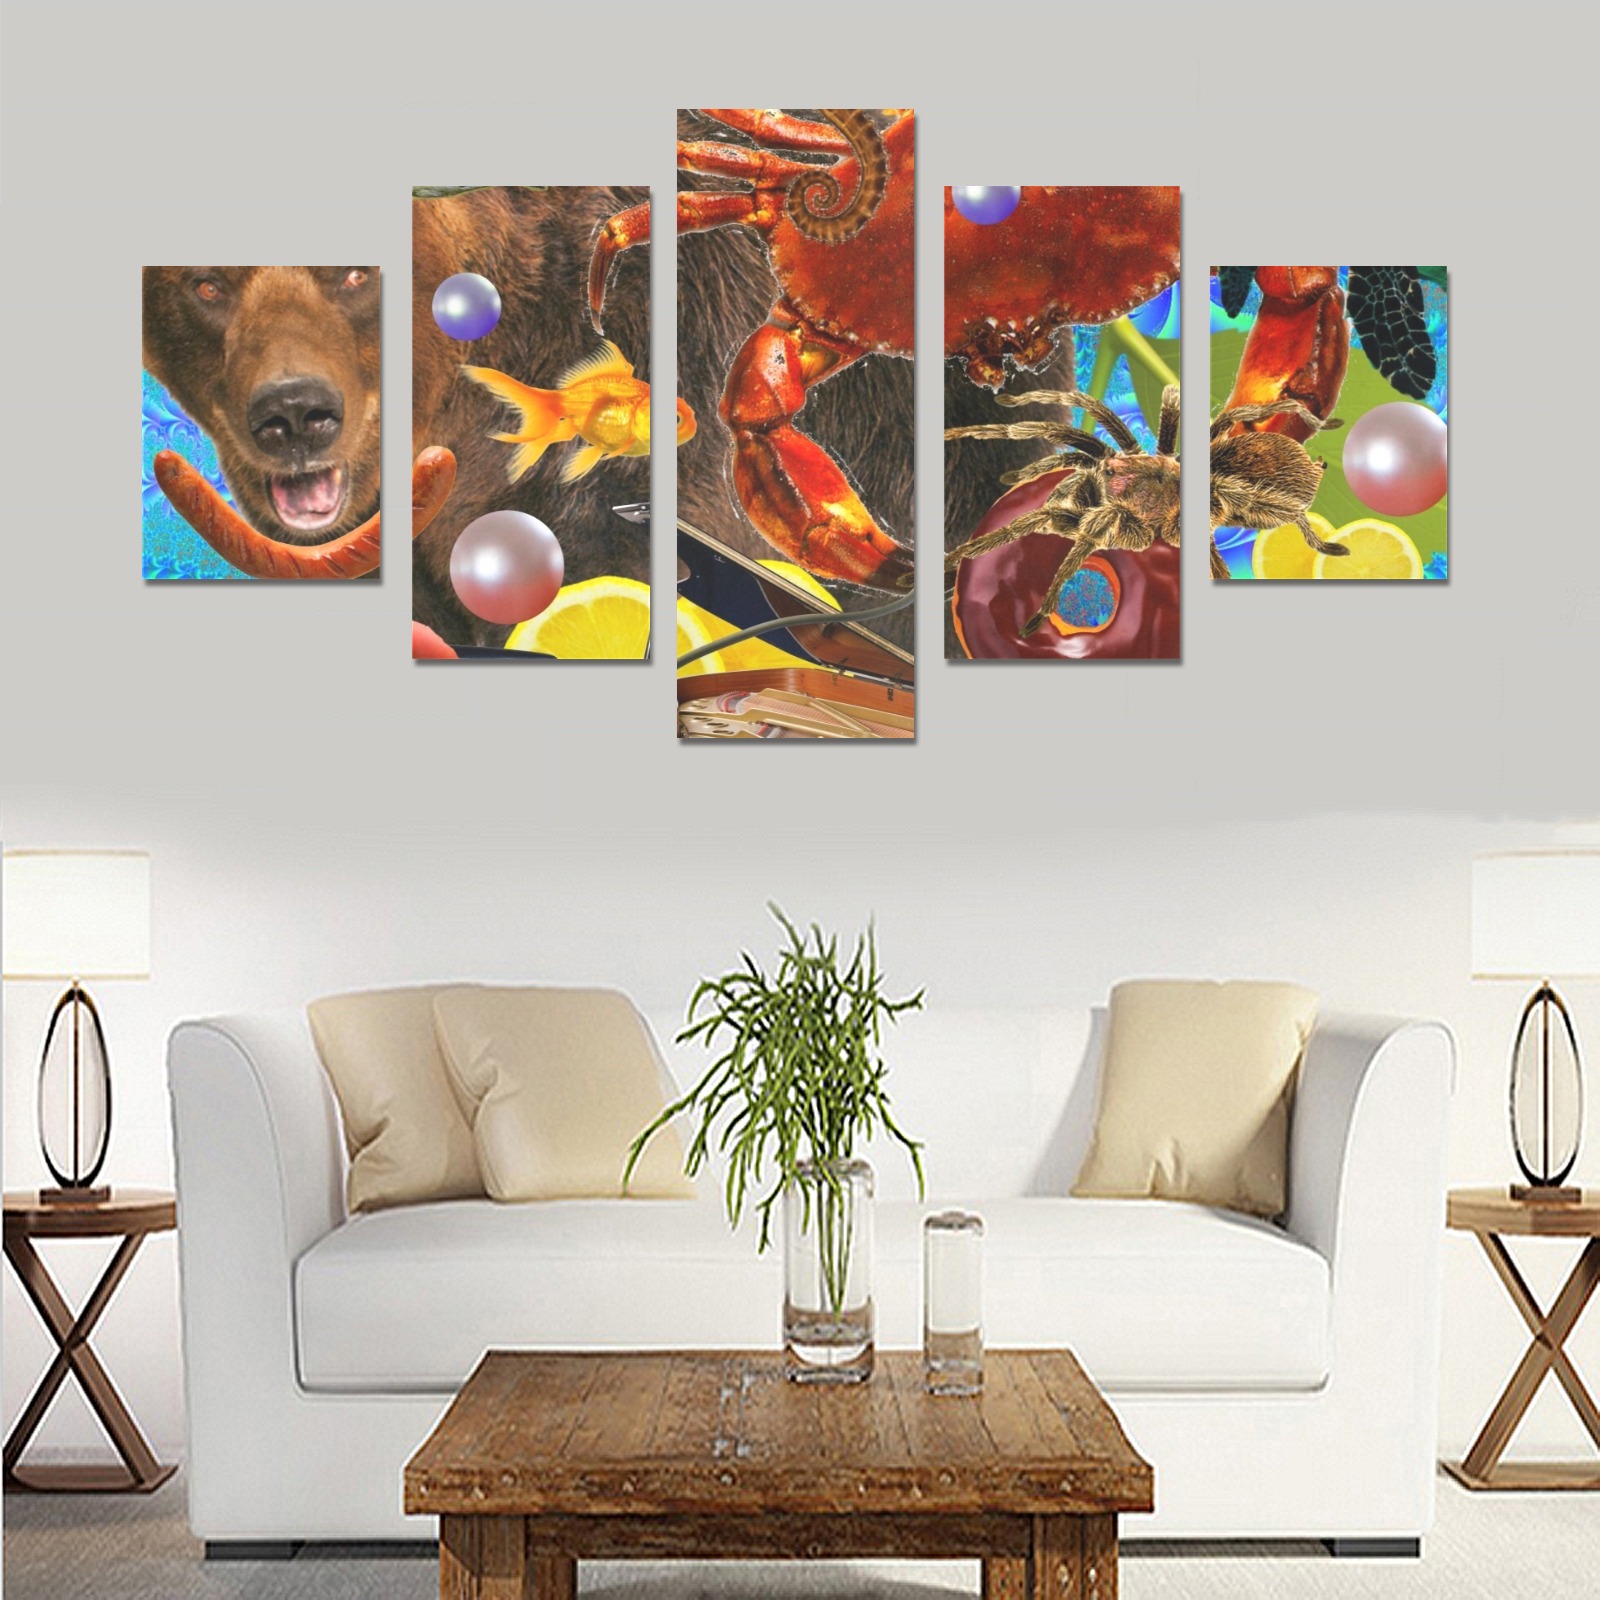 THROUGH SPACE AND TIME 2 Canvas Print Sets B (No Frame)